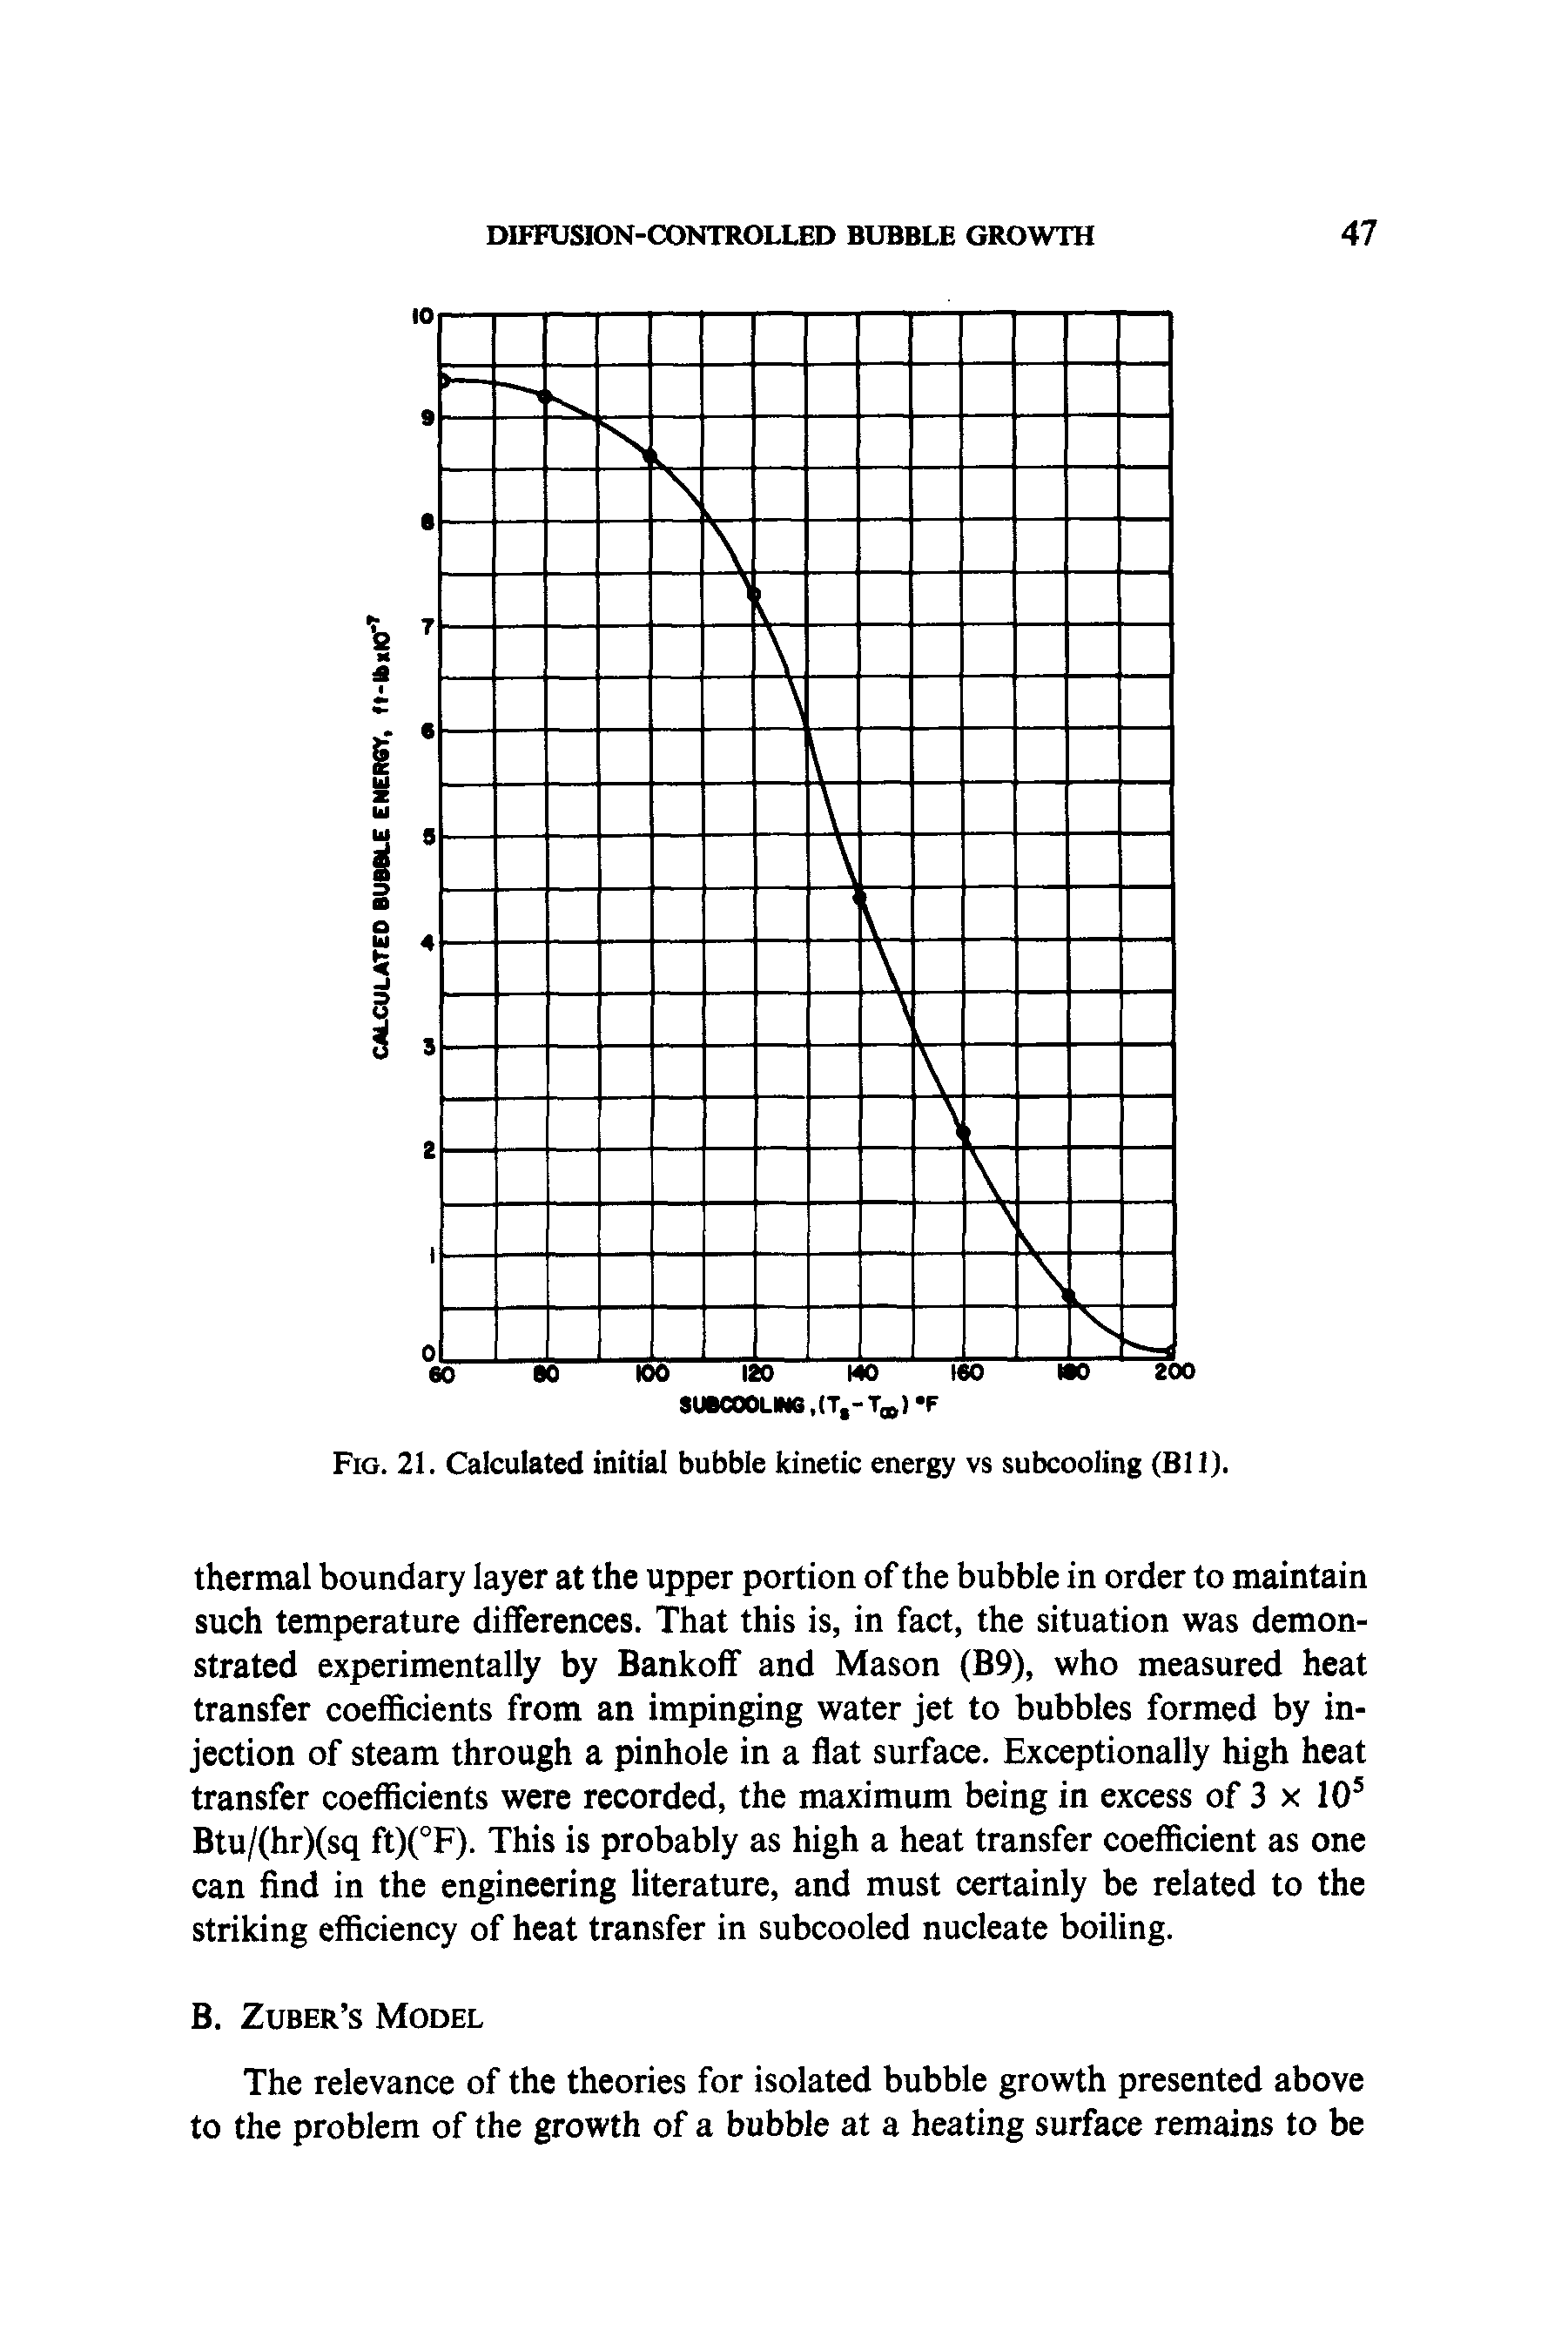 Fig. 21. Calculated initial bubble kinetic energy vs subcooling (Bll).